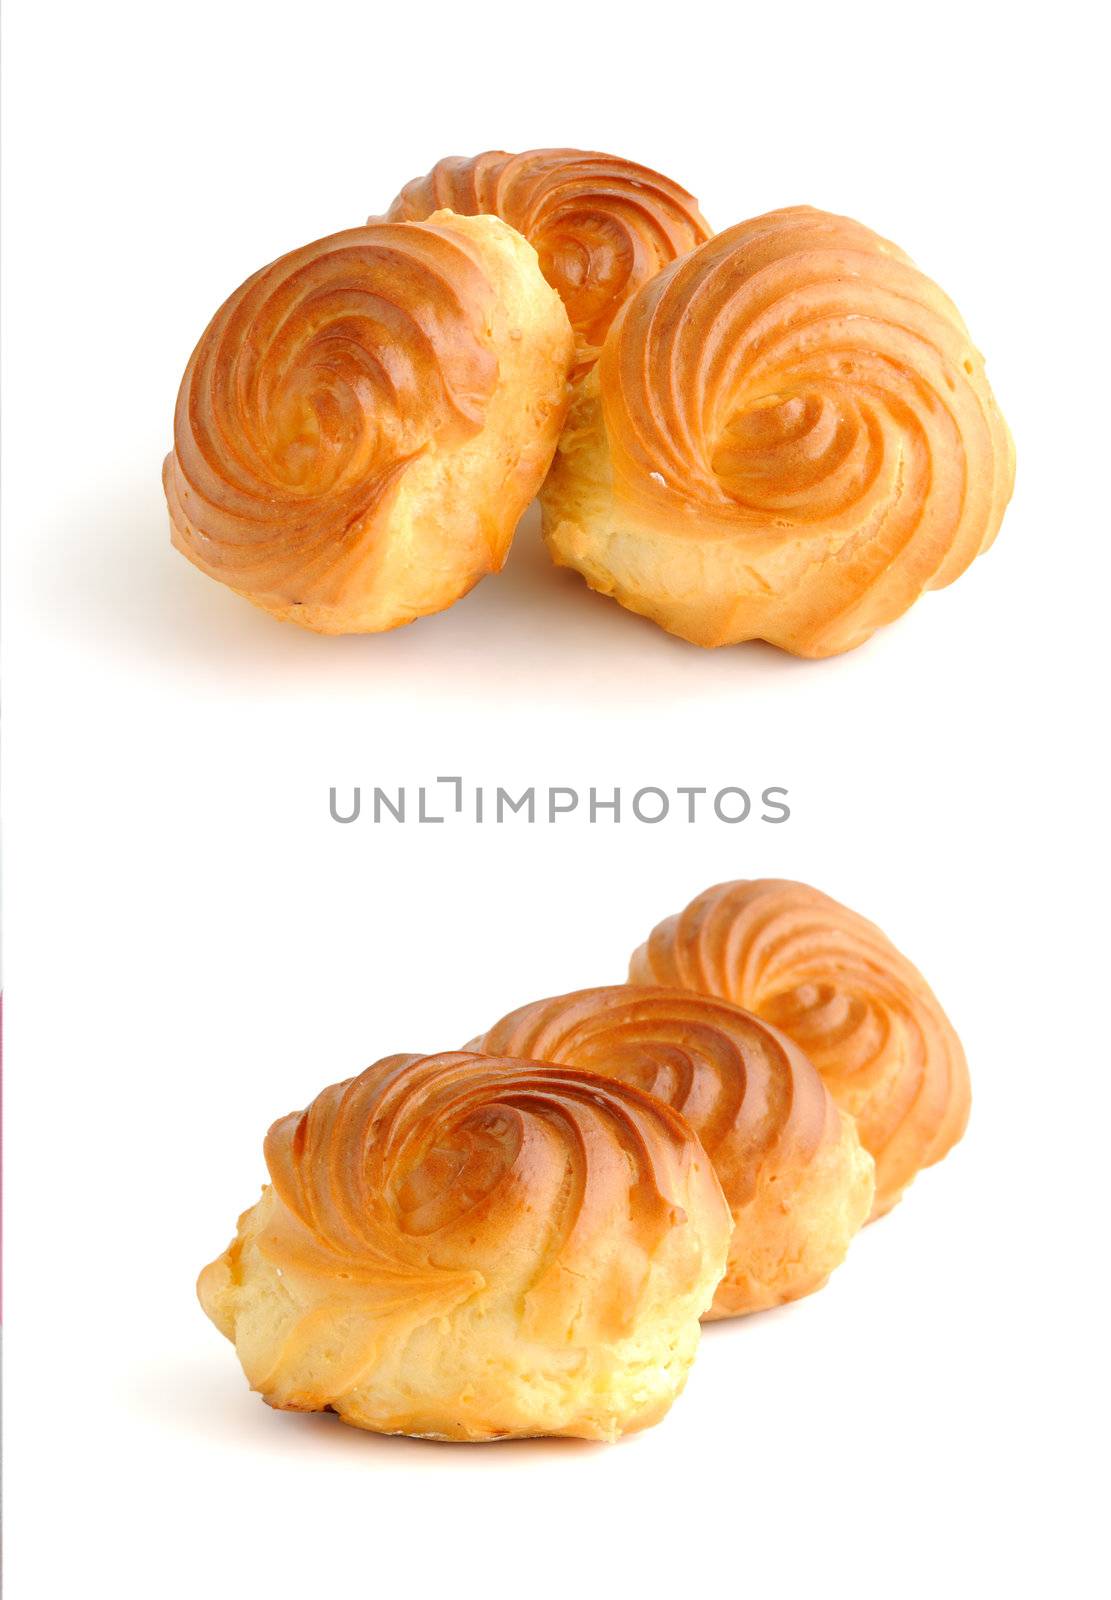  Eclairs on a white background (isolated) of different types